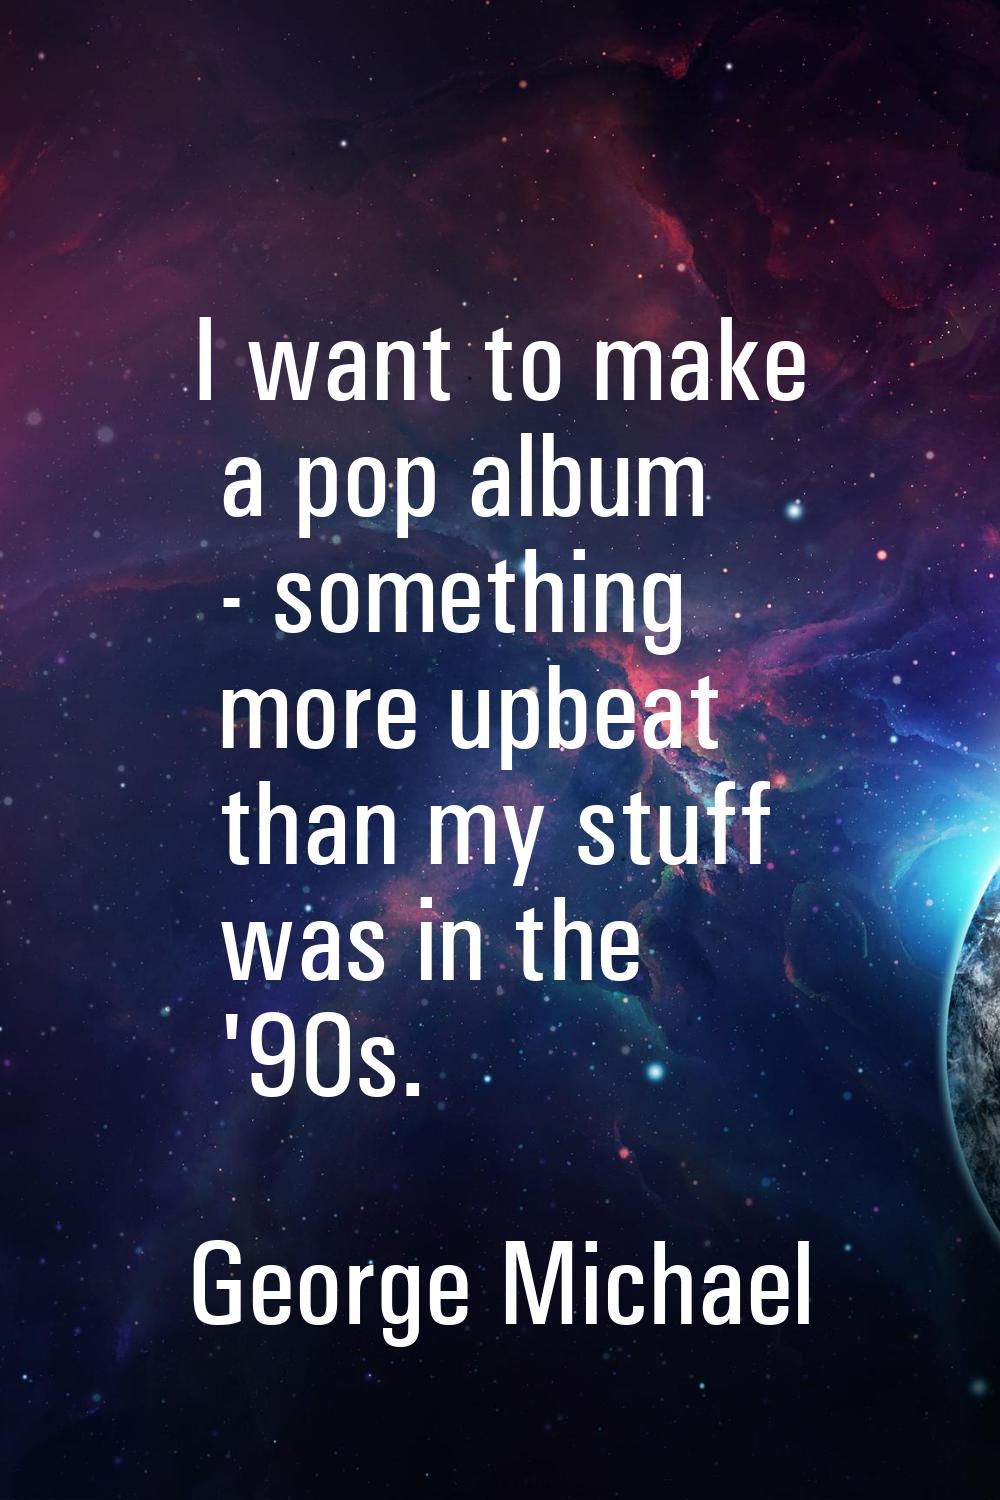 I want to make a pop album - something more upbeat than my stuff was in the '90s.